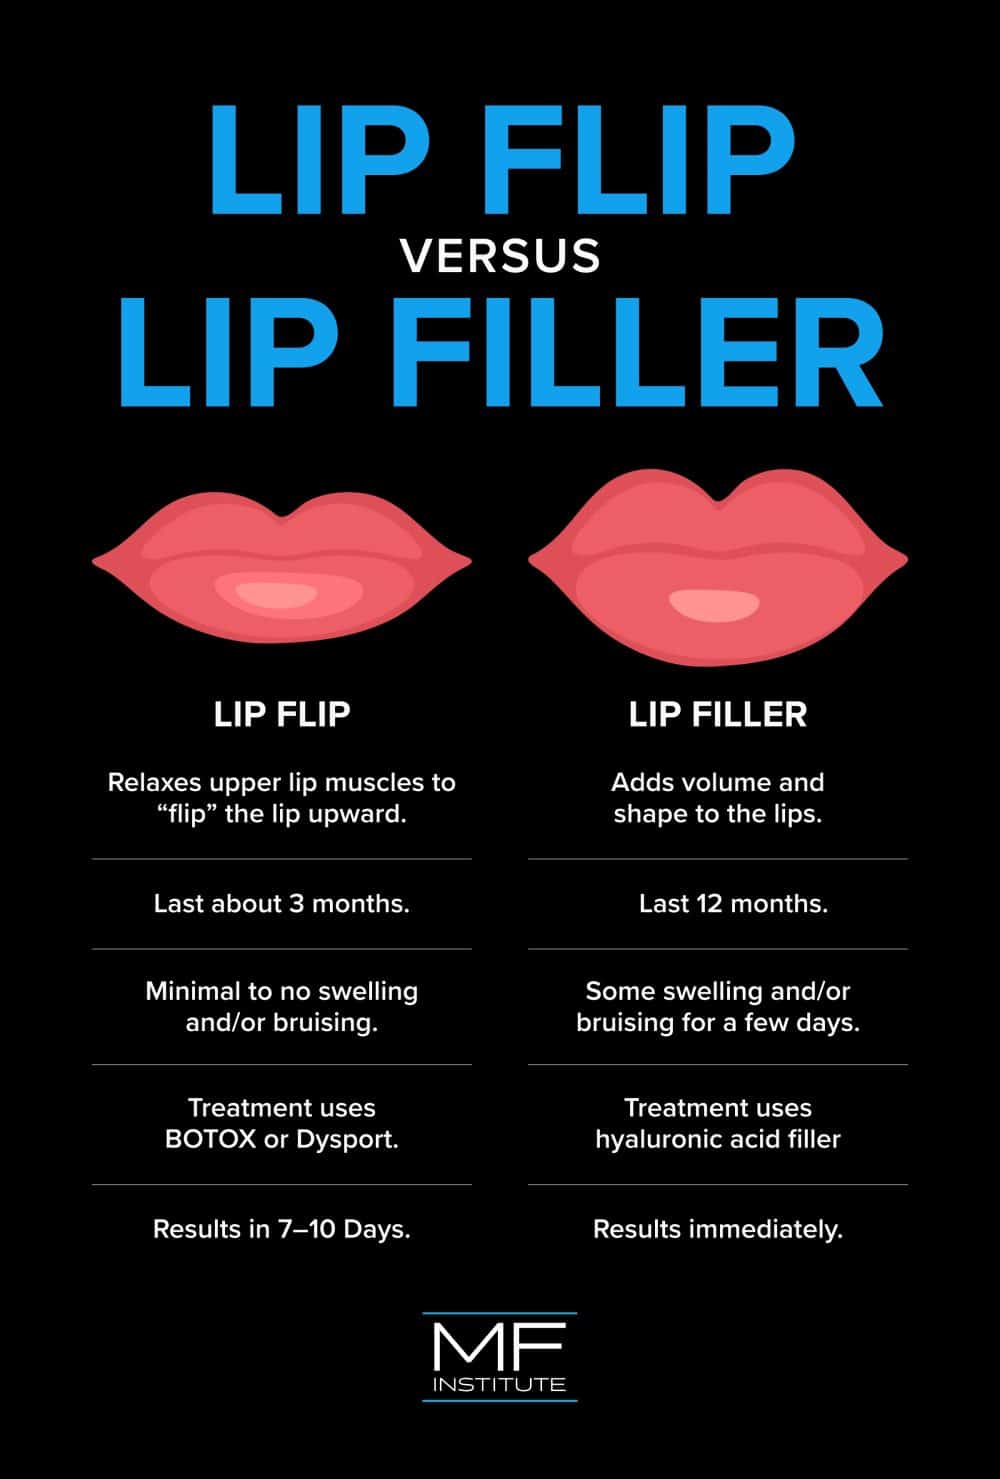 Achieving naturally fuller lips without the need for invasive procedures is possible through various non-surgical methods and lifestyle practices.